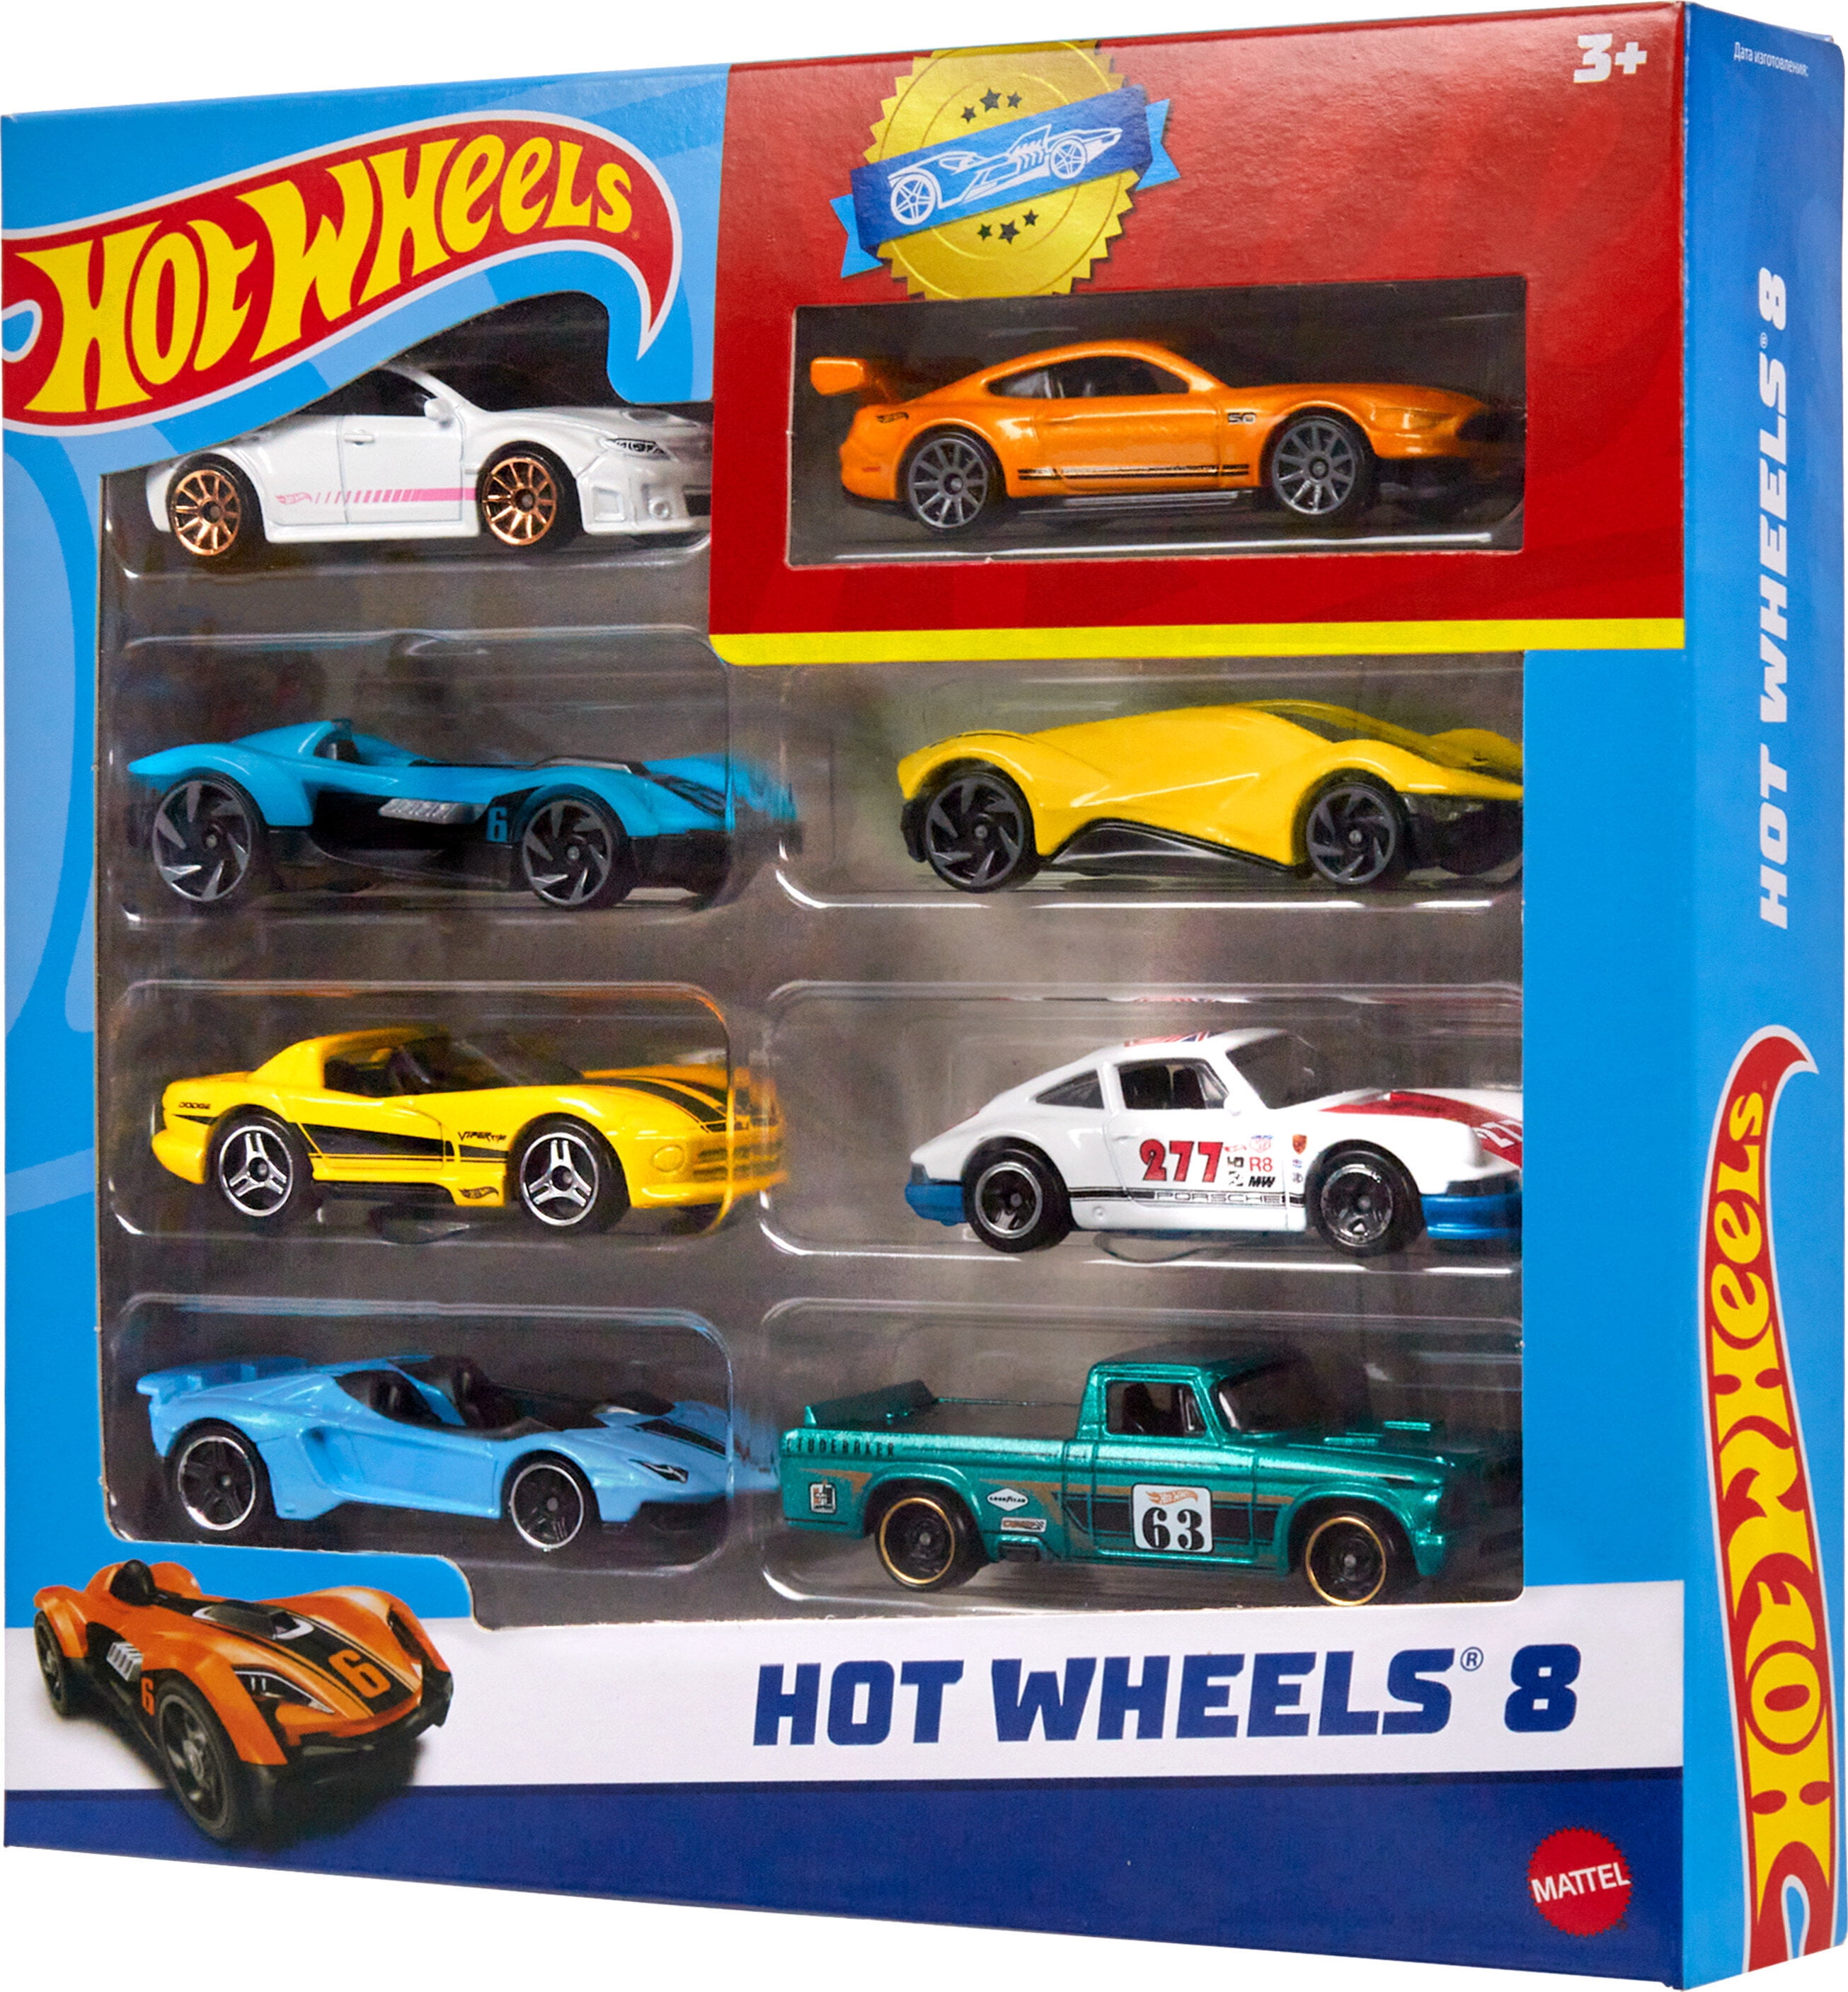 Hot Wheels 1:64 Scale Cars & Trucks Set with 1 Exclusive - 8 Pack